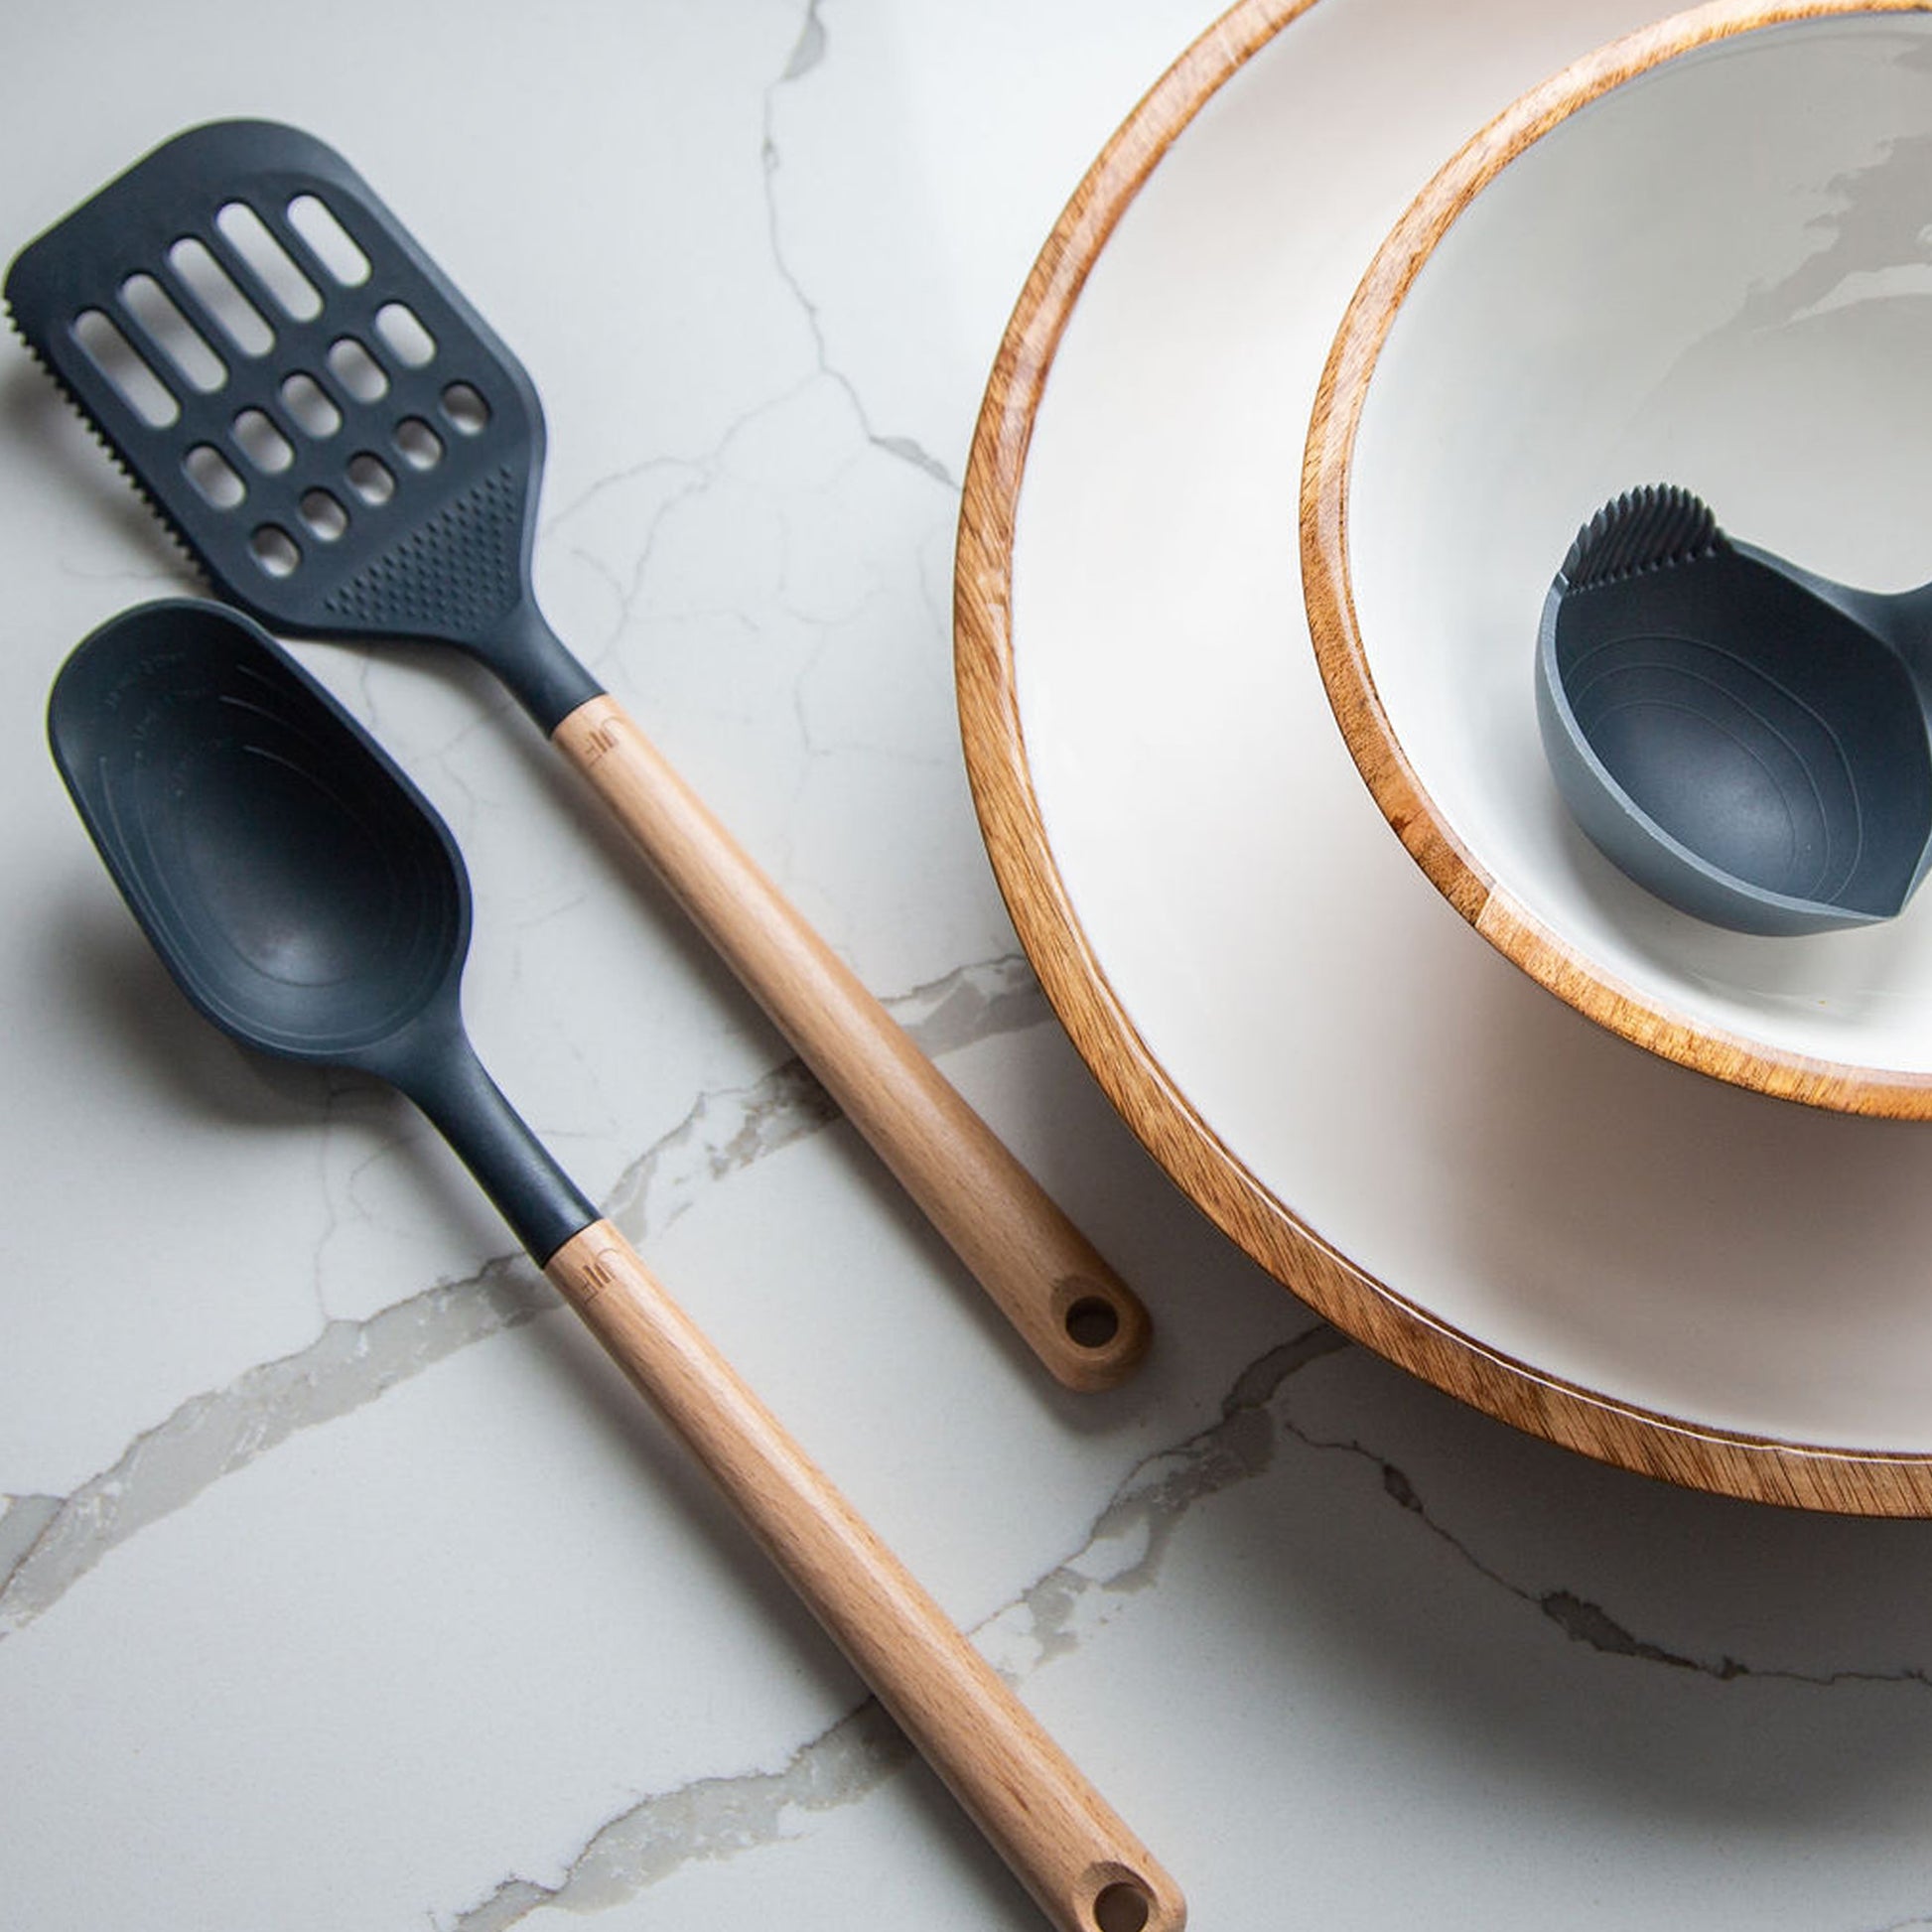 This $30 Cooking Utensil Set Is Perfect for First Apartments – SheKnows